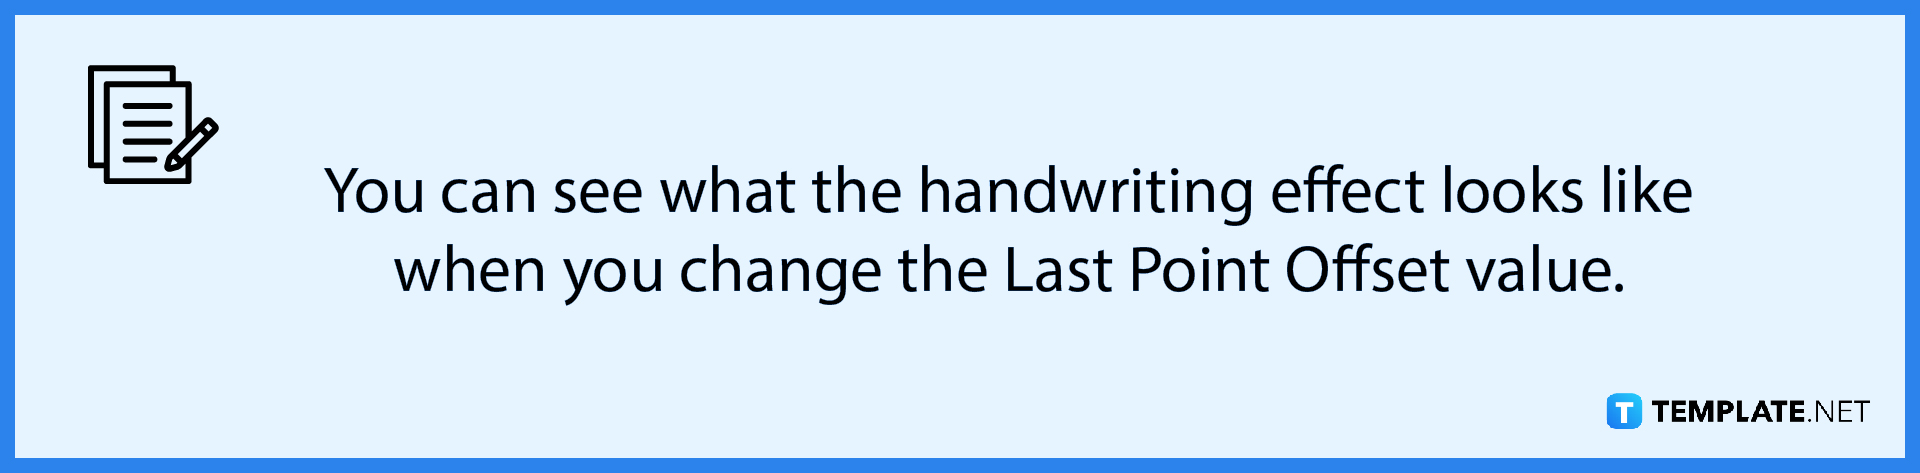 how-to-do-a-handwriting-effect-on-apple-motion-note-02